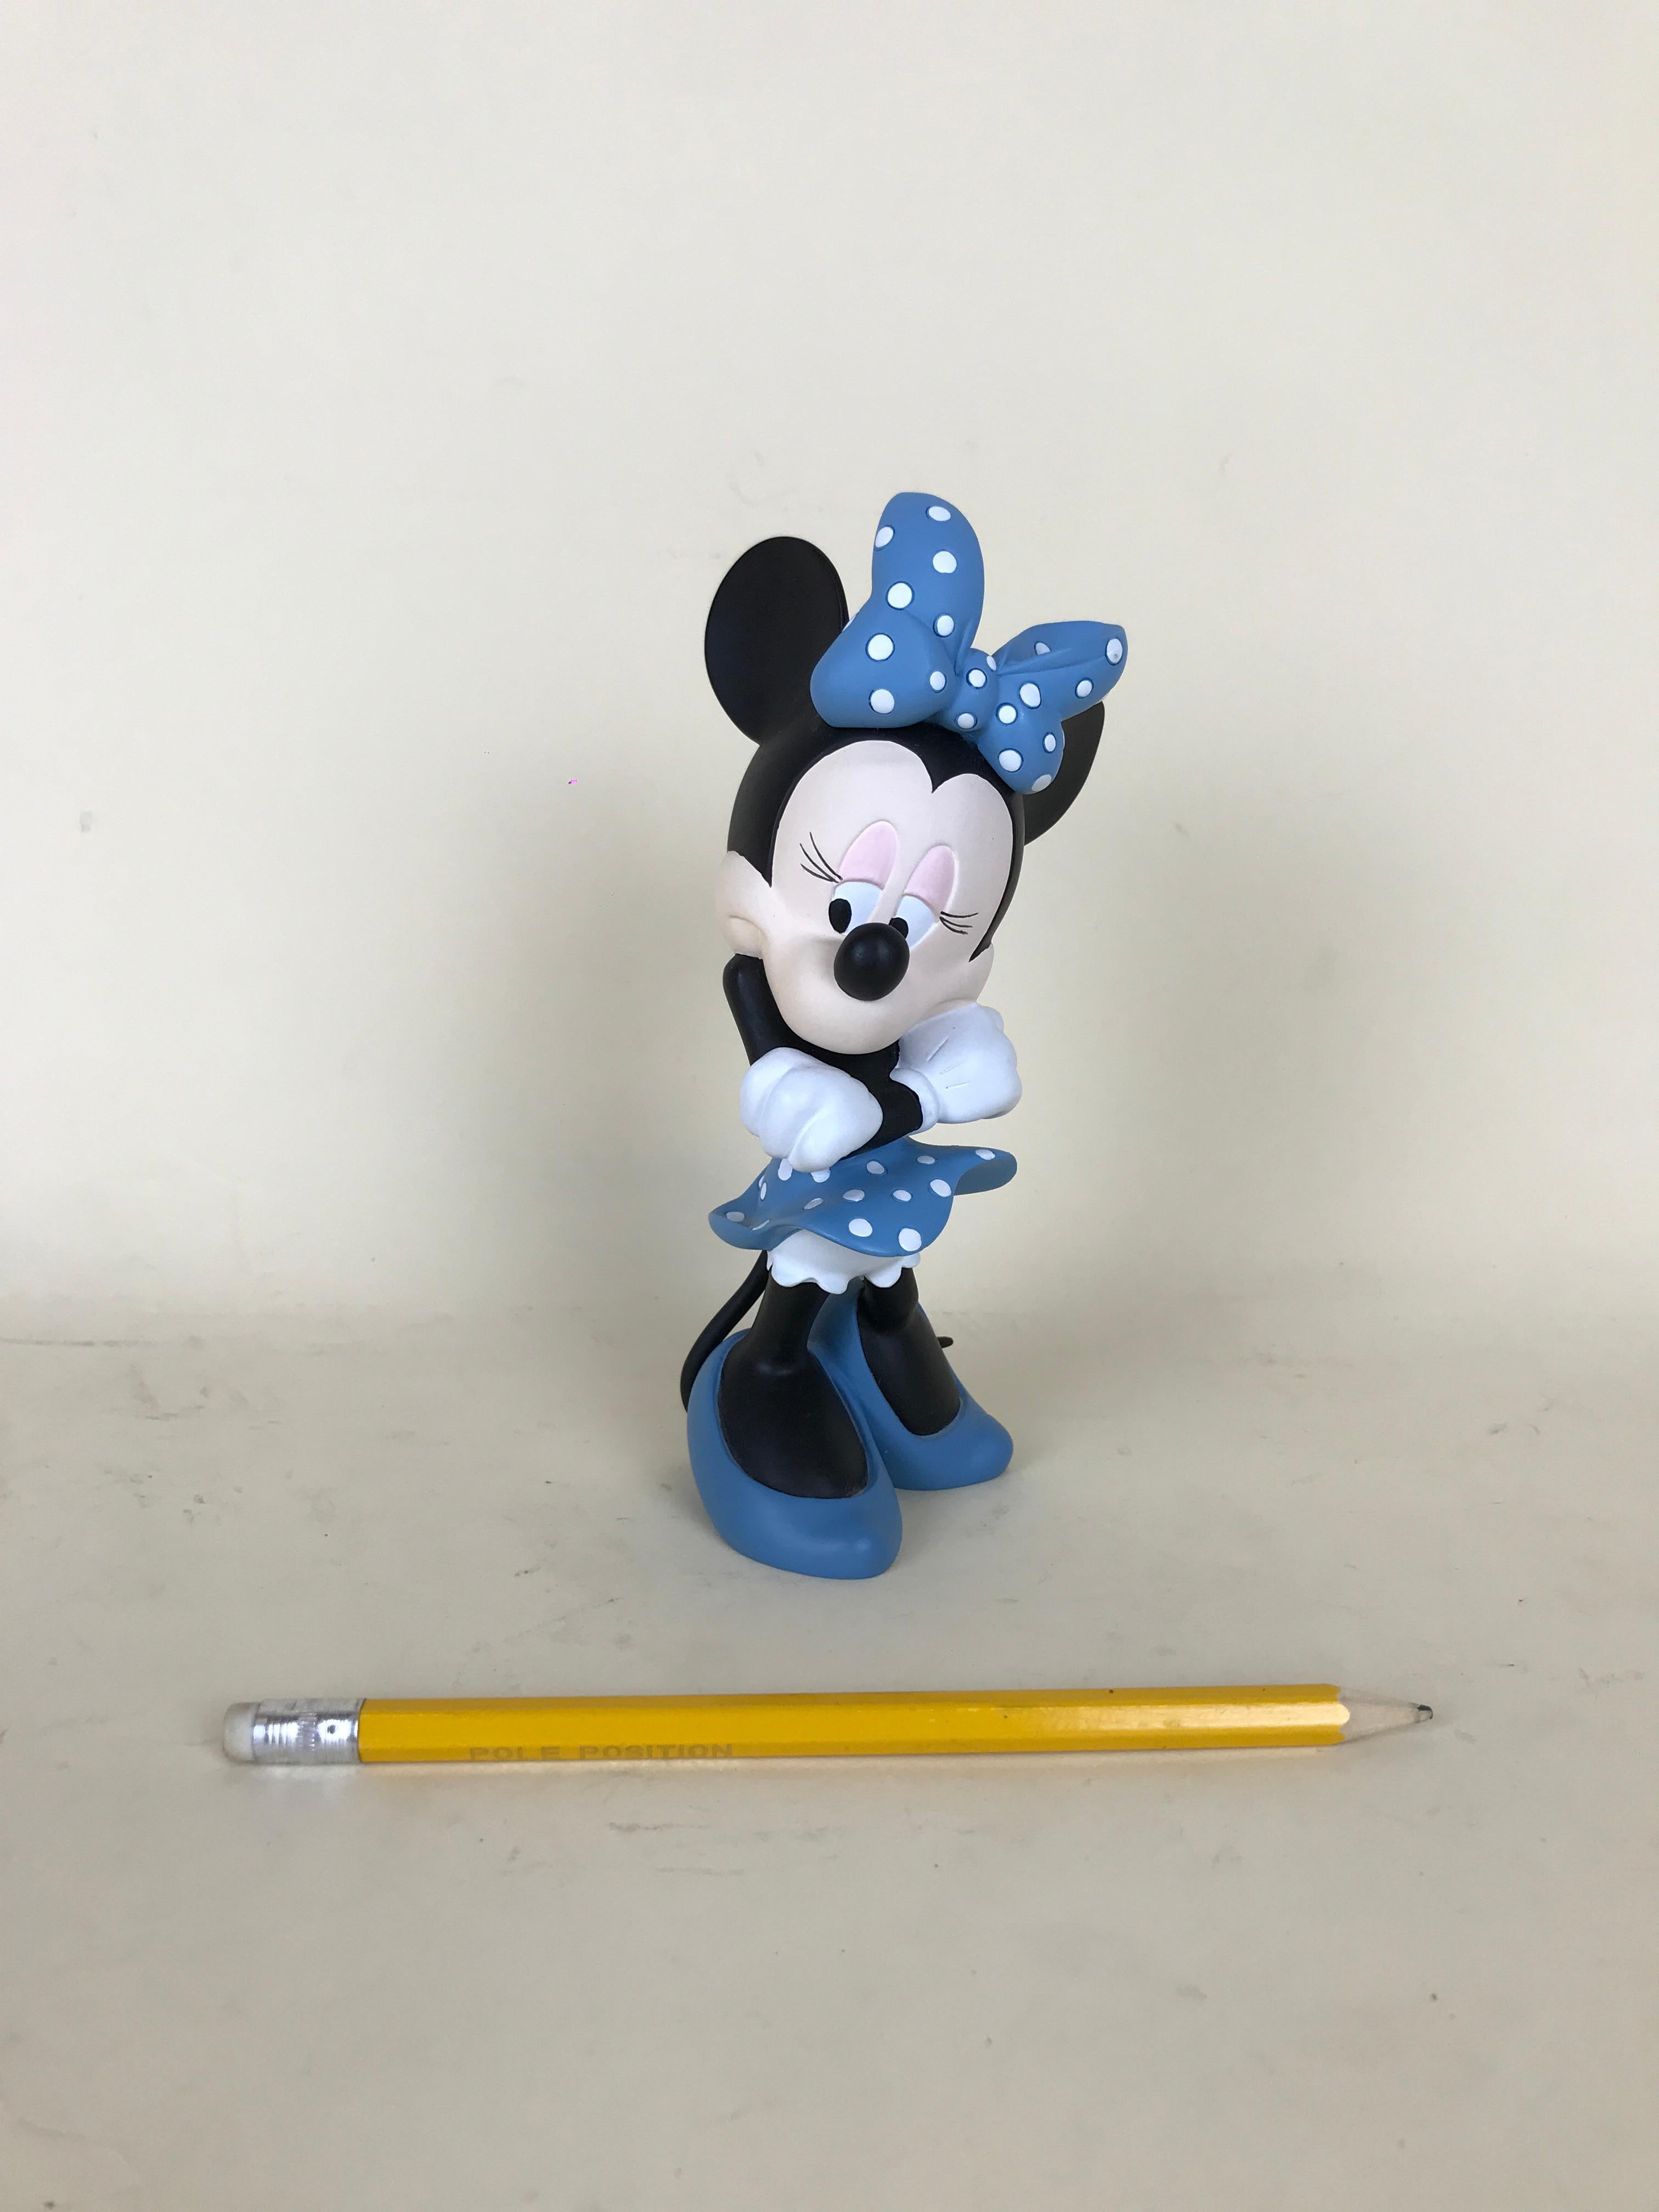 Walt Disney Minnie Mouse statue by French company Demons & Merveilles for Walt Disney realized in resin in the 2000s.

The statue doesn't have the original box.